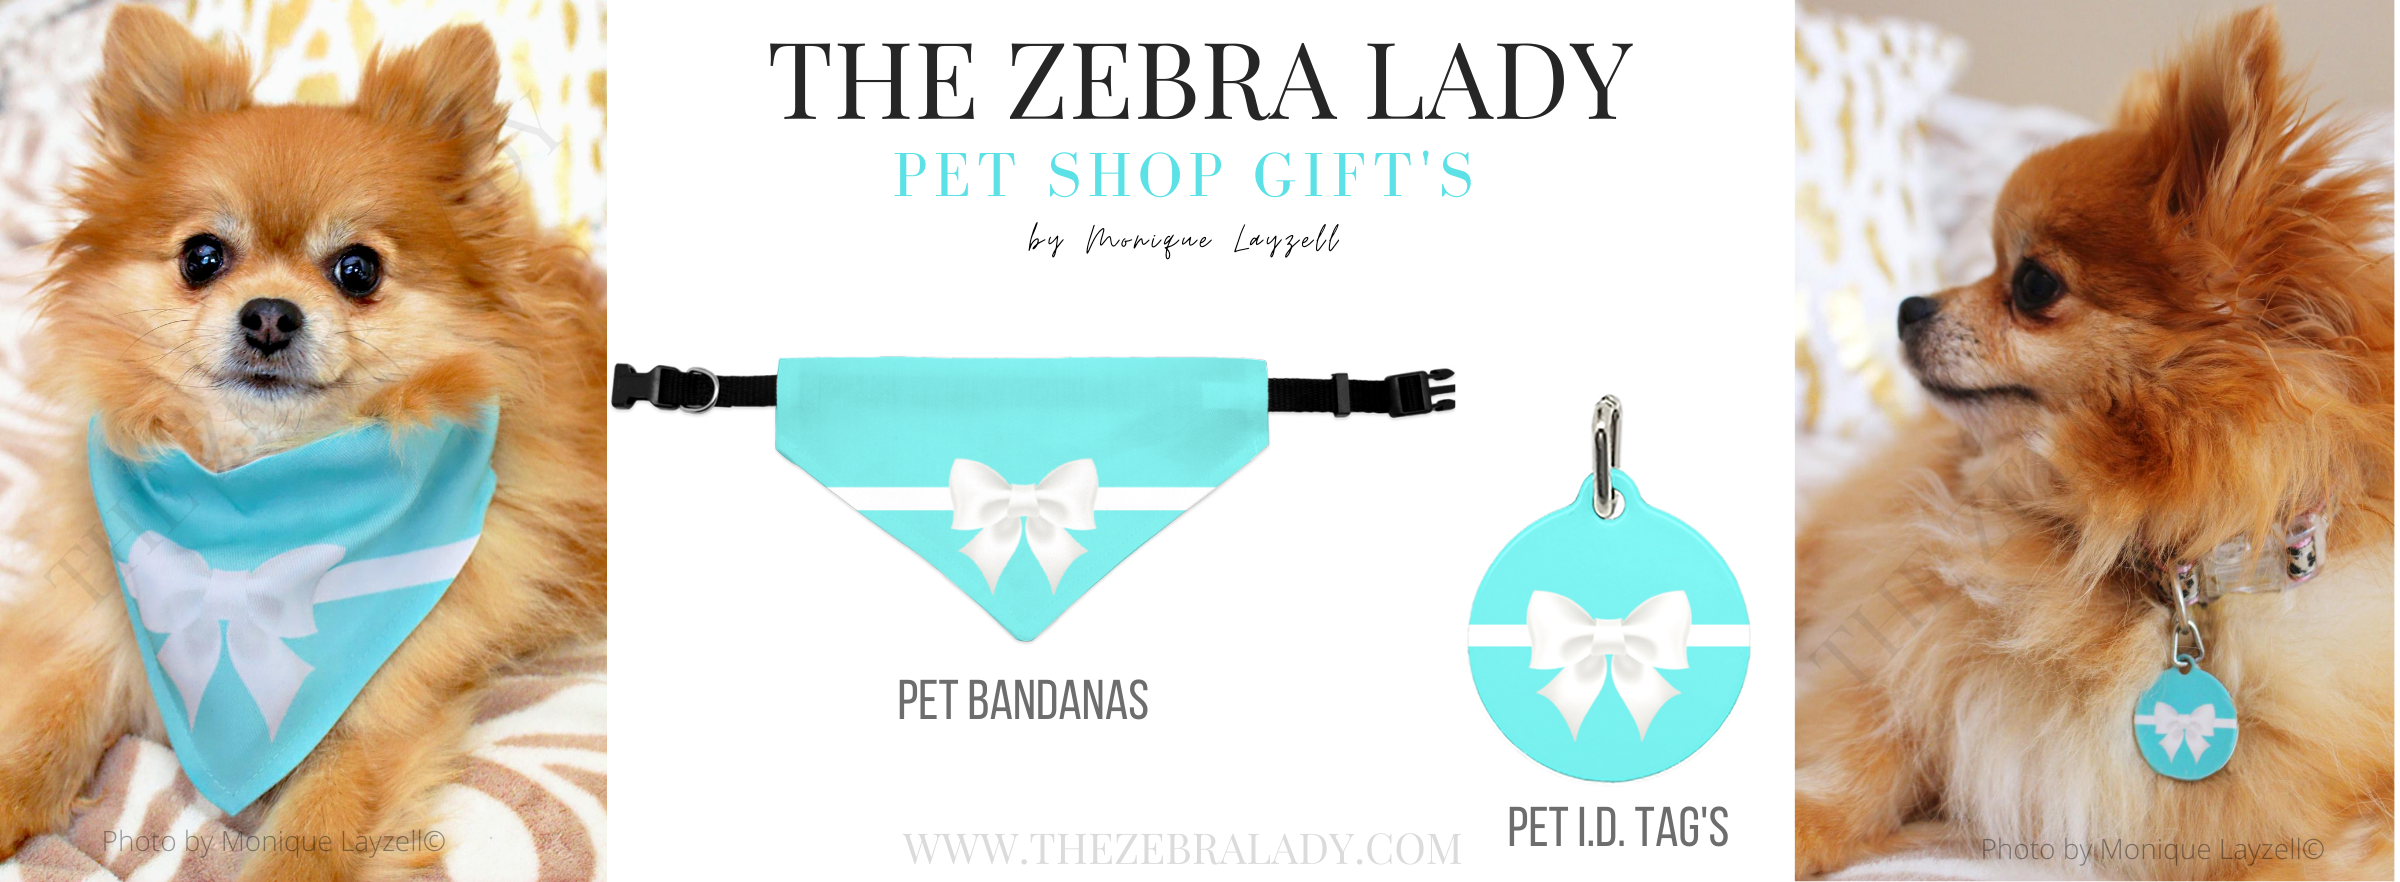 pet Breakfast at Tiffany's   banner website Monique Layzell©.png